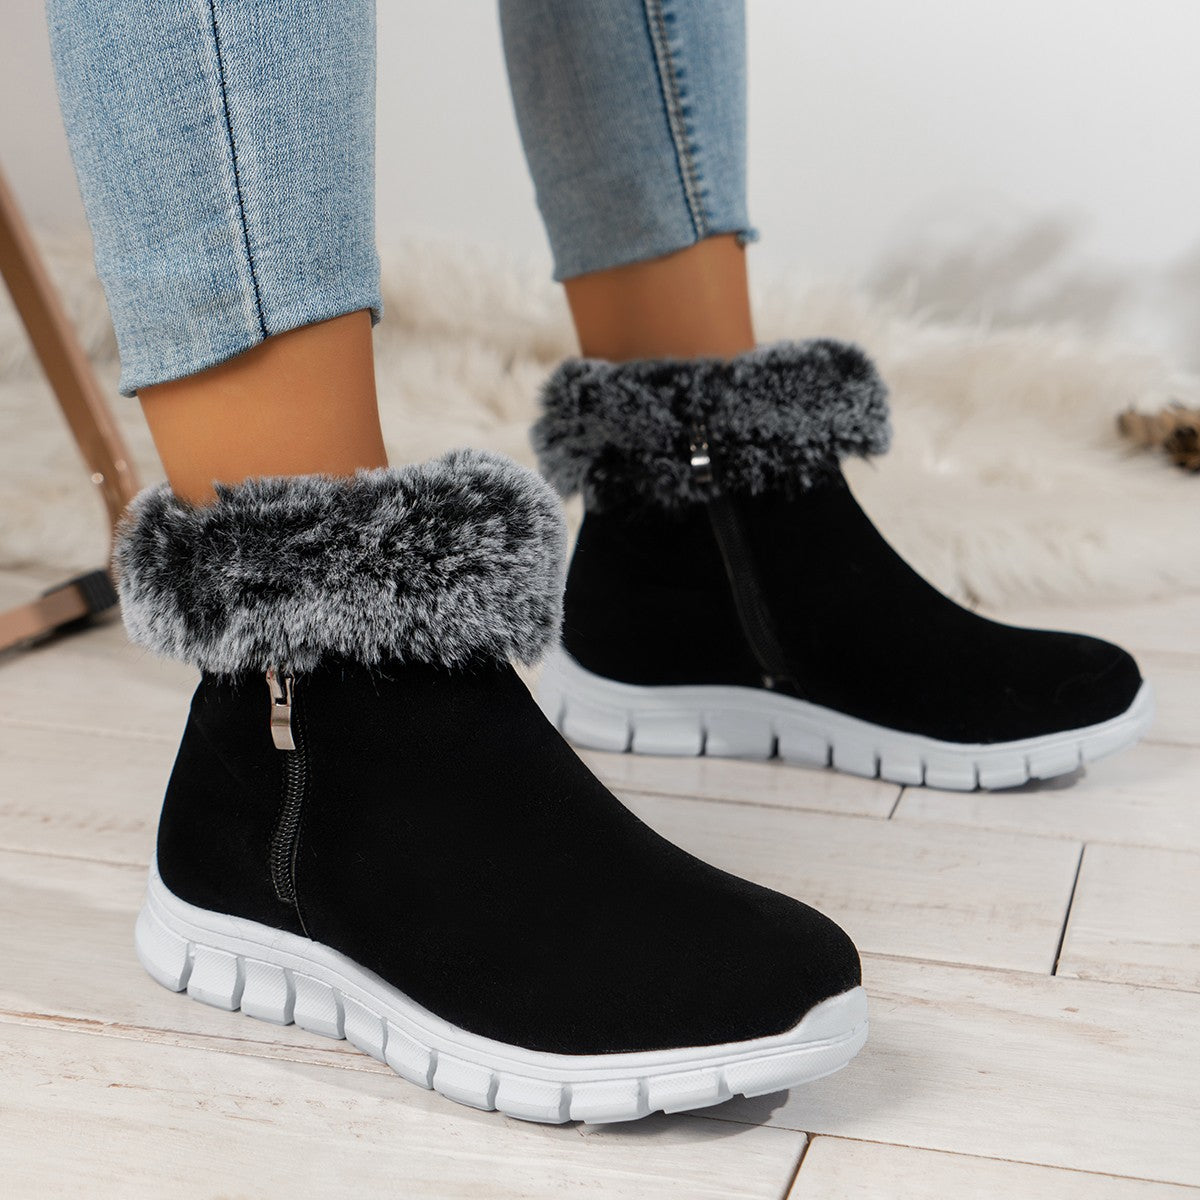 Women's flat warm thickened short boots